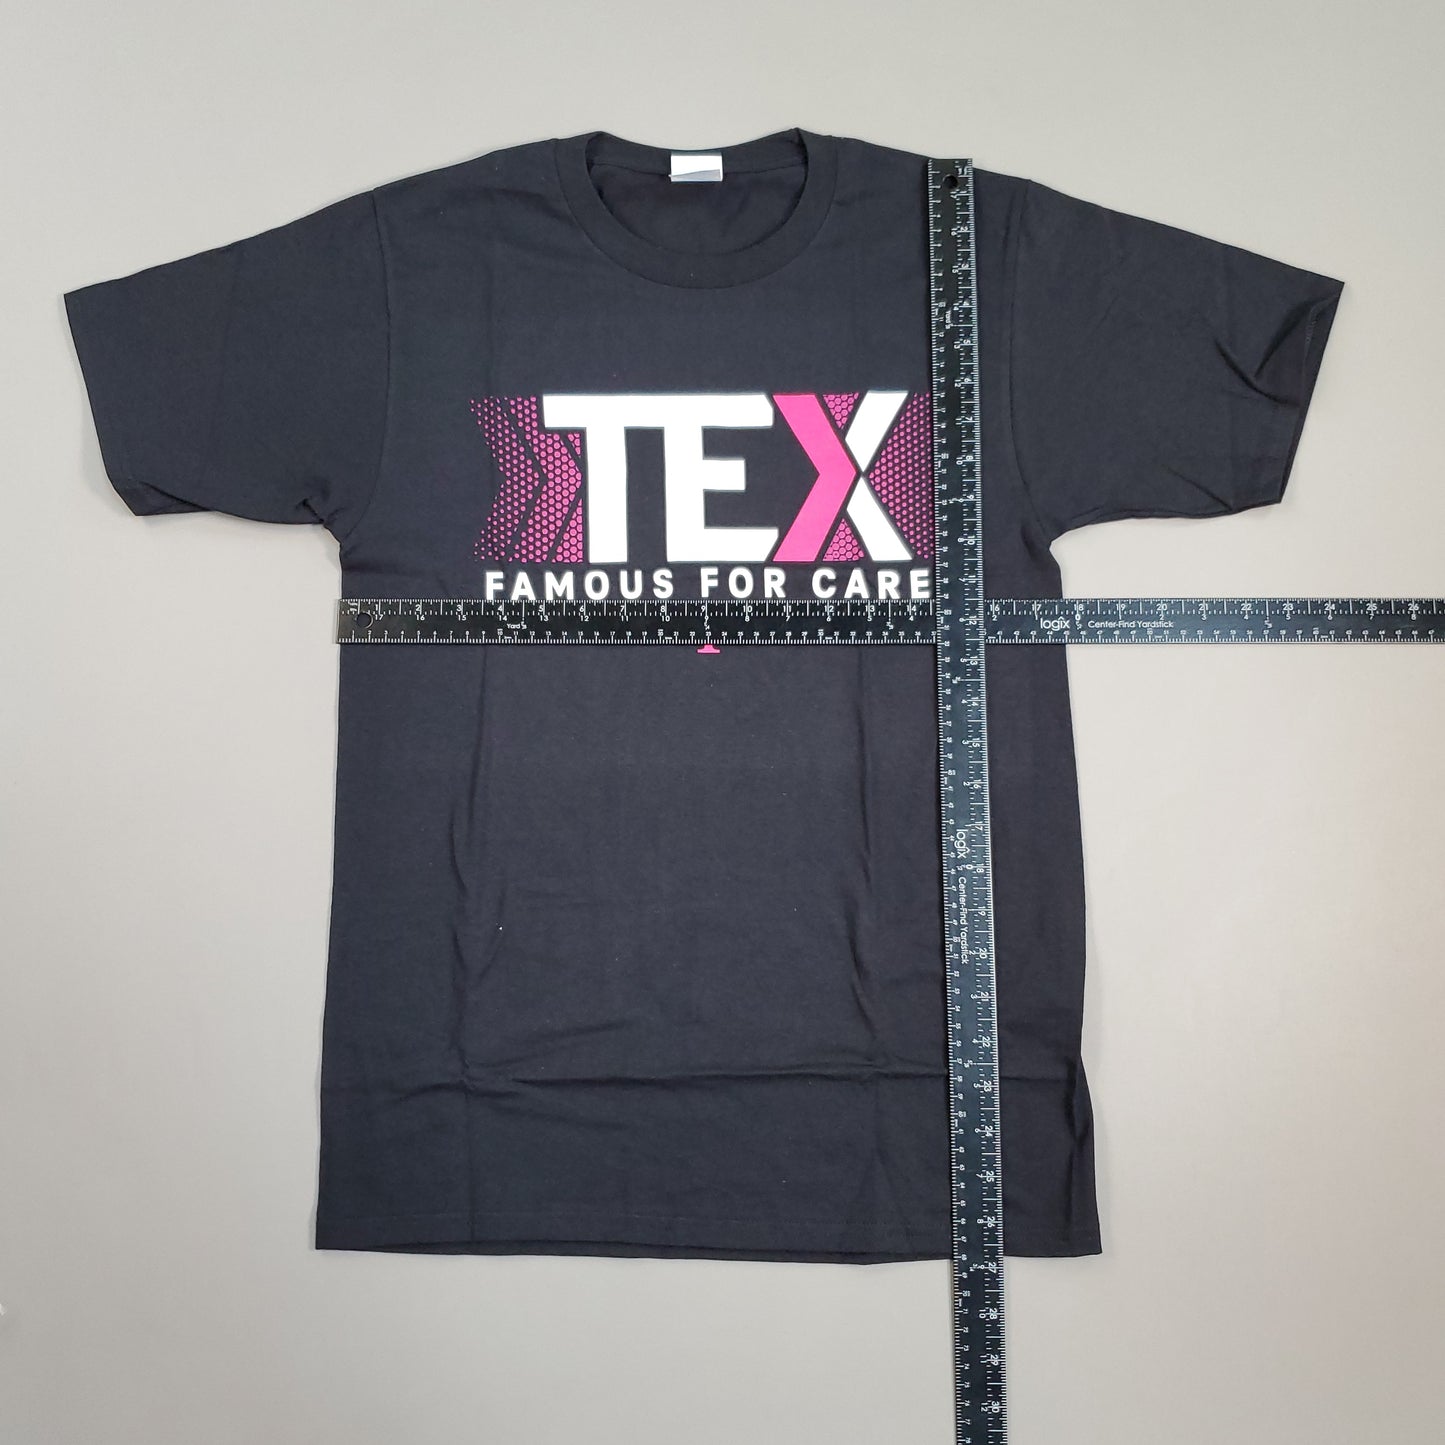 T-MOBILE Tee Shirt Short Sleeve TEX Famous For Care Men's Unisex Sz XS Black/Pink (New)